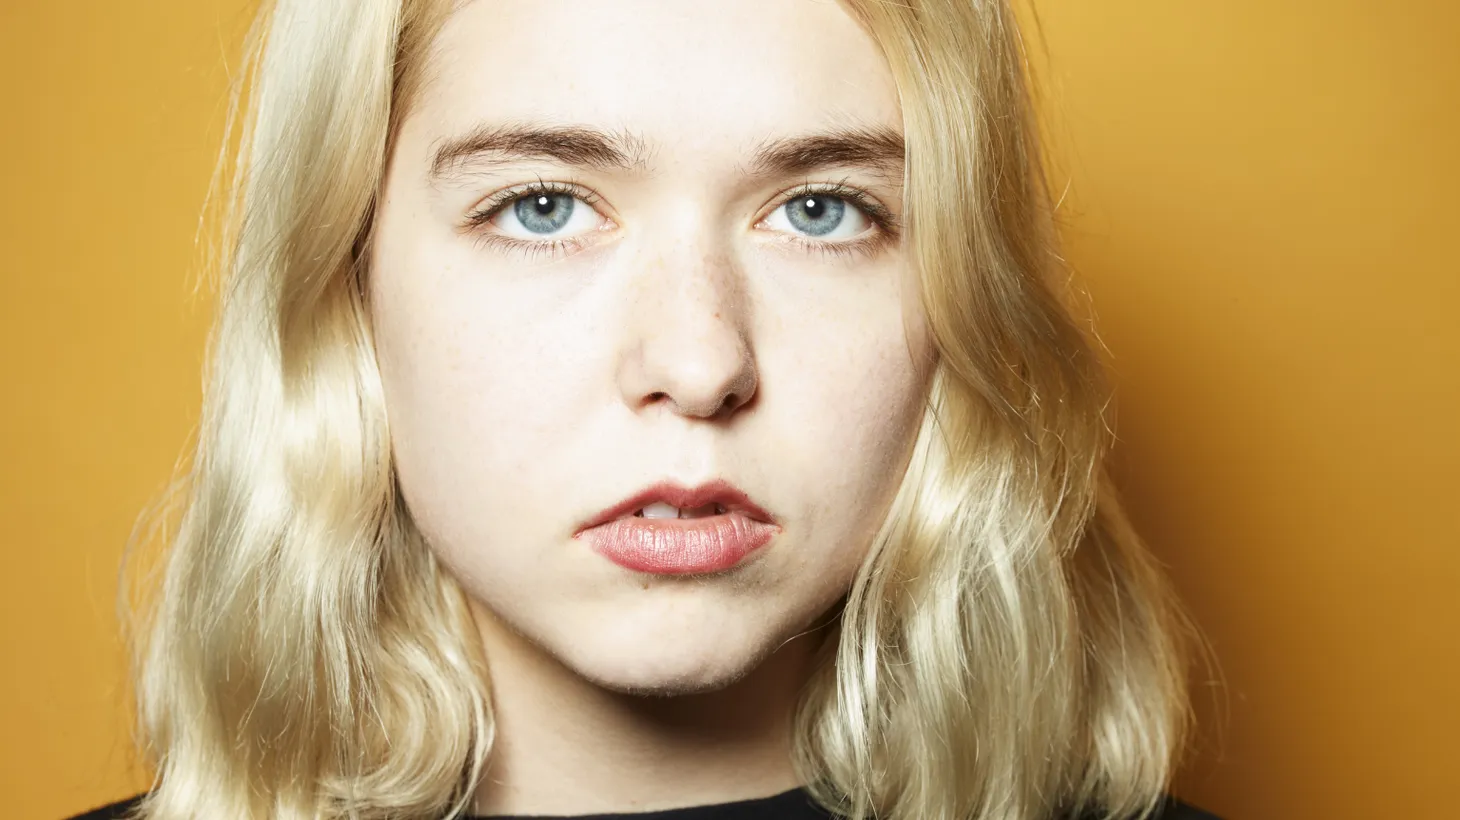 Lindsey Jordan aka Snail Mail released her debut EP at 15, was signed to a major label at 18 and released her first album just shy of her 19th birthday. The young powerhouse performer will join us for a live in-studio performance.